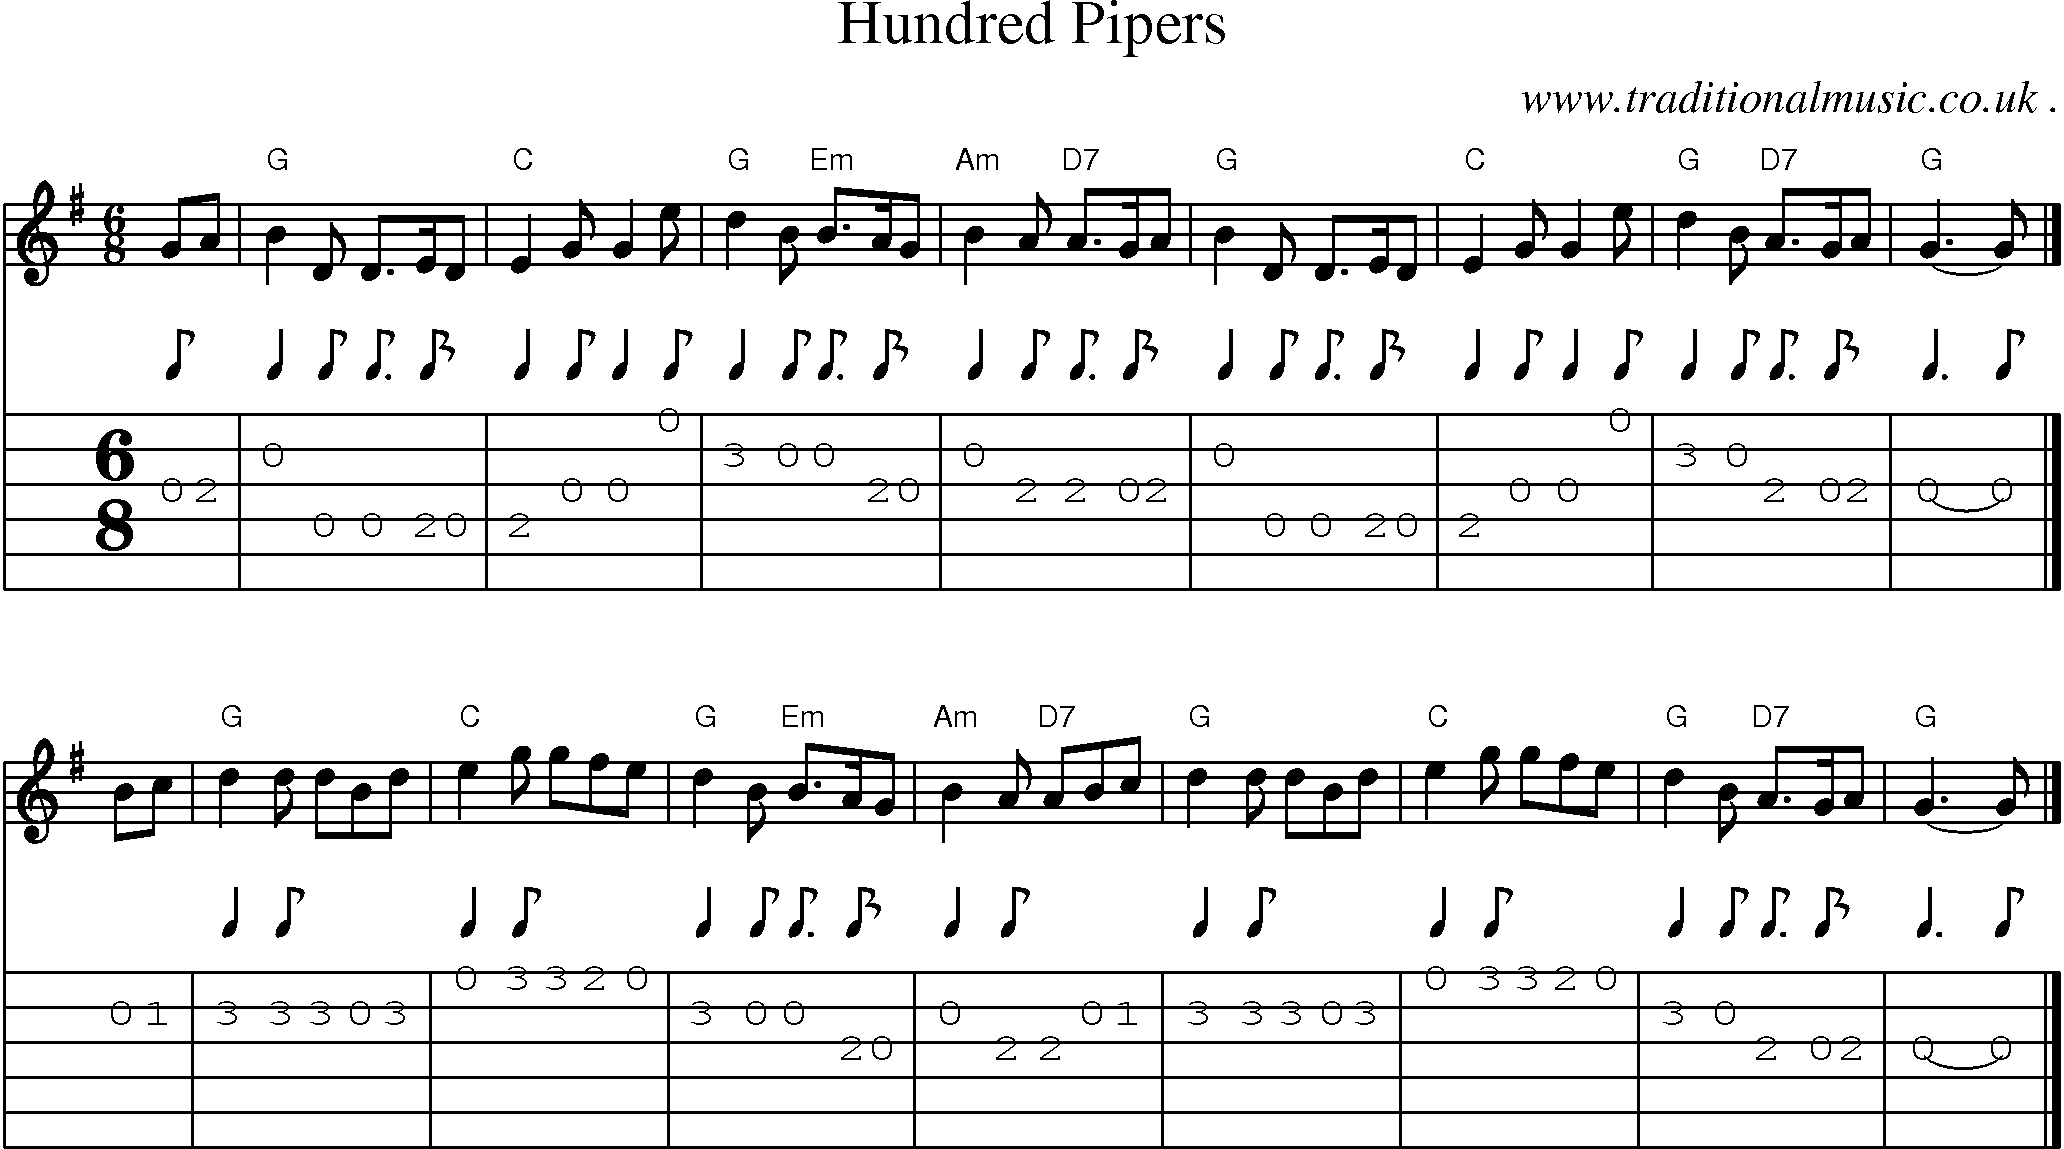 Sheet-music  score, Chords and Guitar Tabs for Hundred Pipers